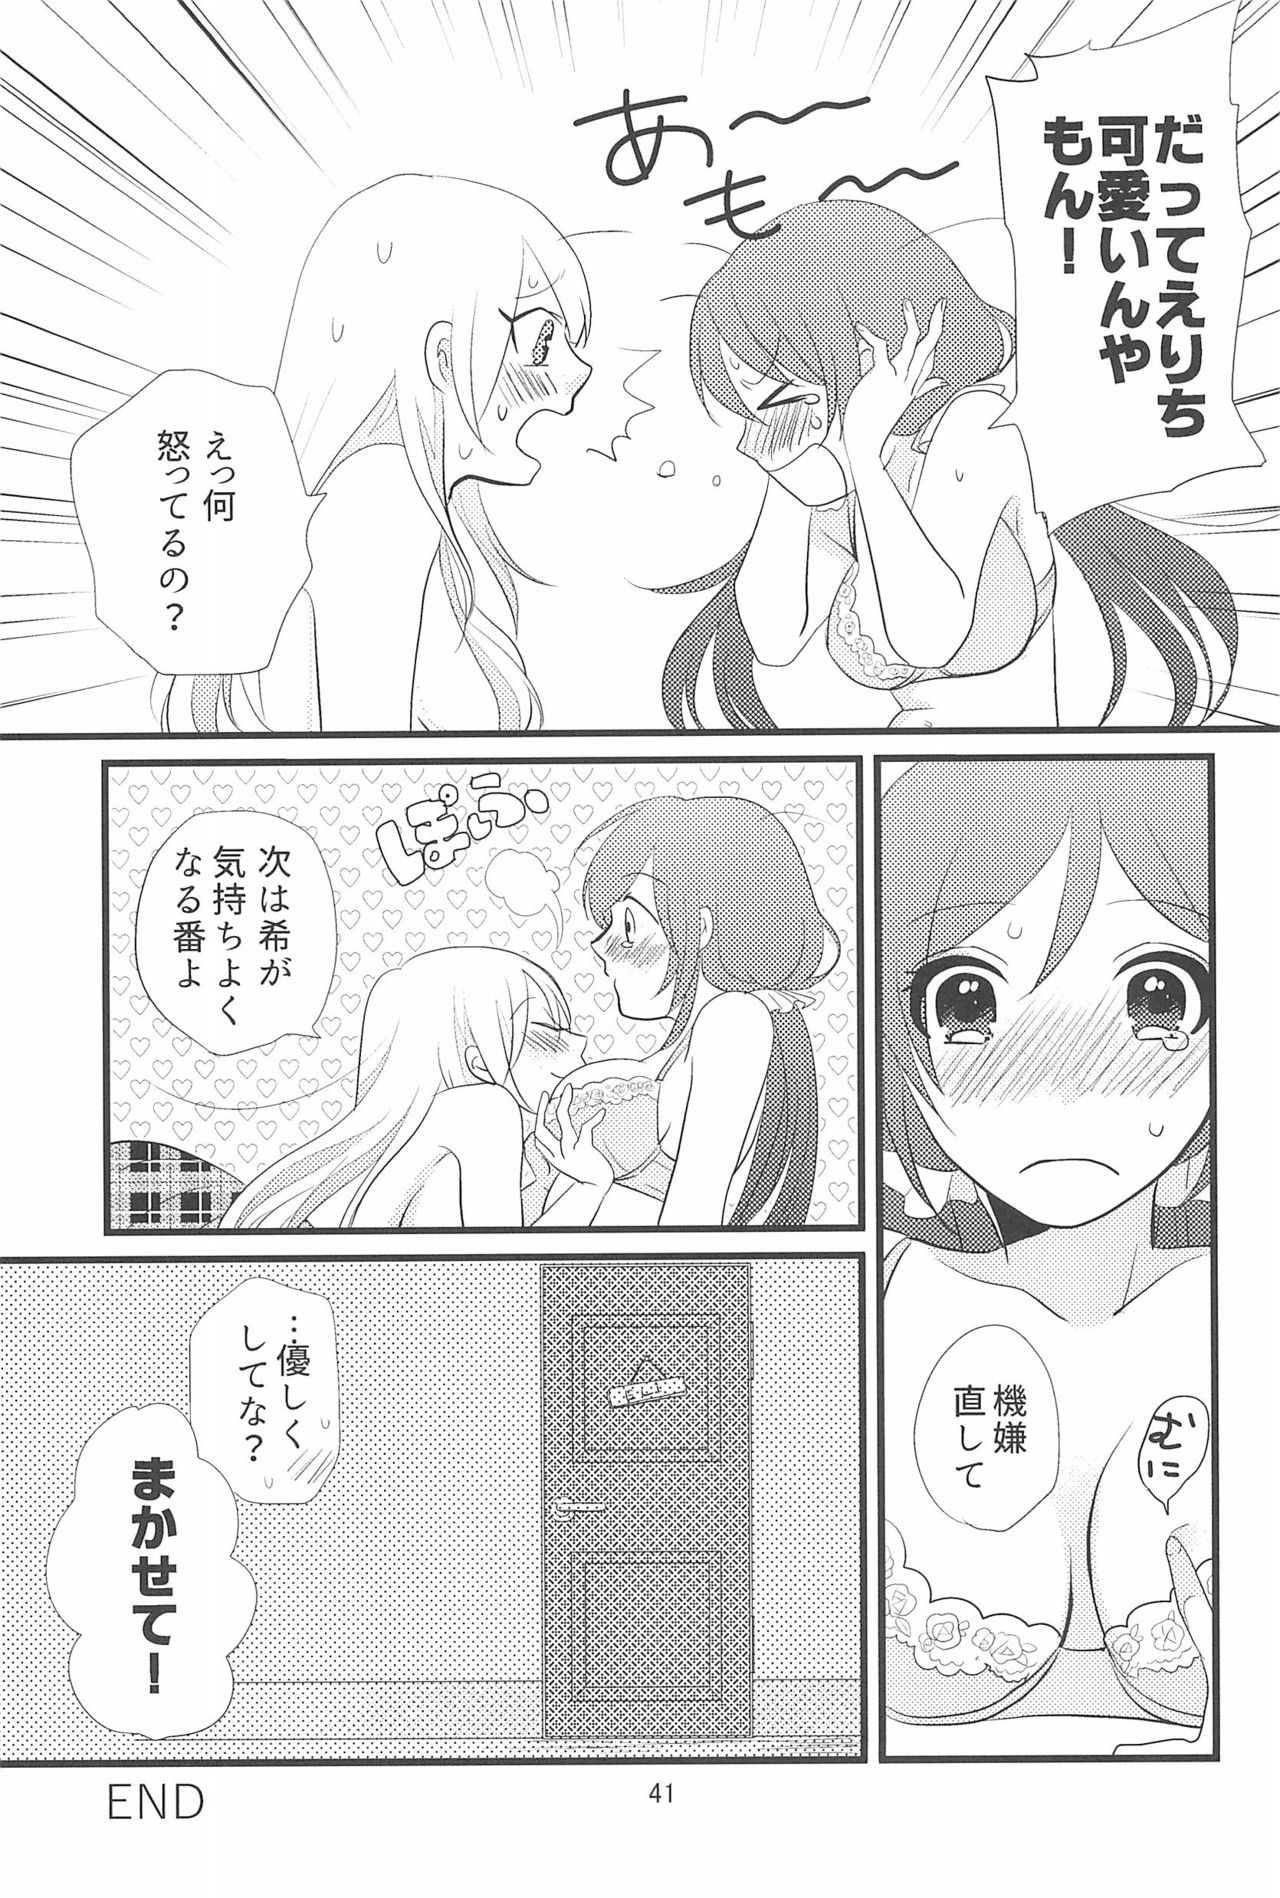 (C90) [BK*N2 (Mikawa Miso)] HAPPY GO LUCKY DAYS (Love Live!) page 45 full